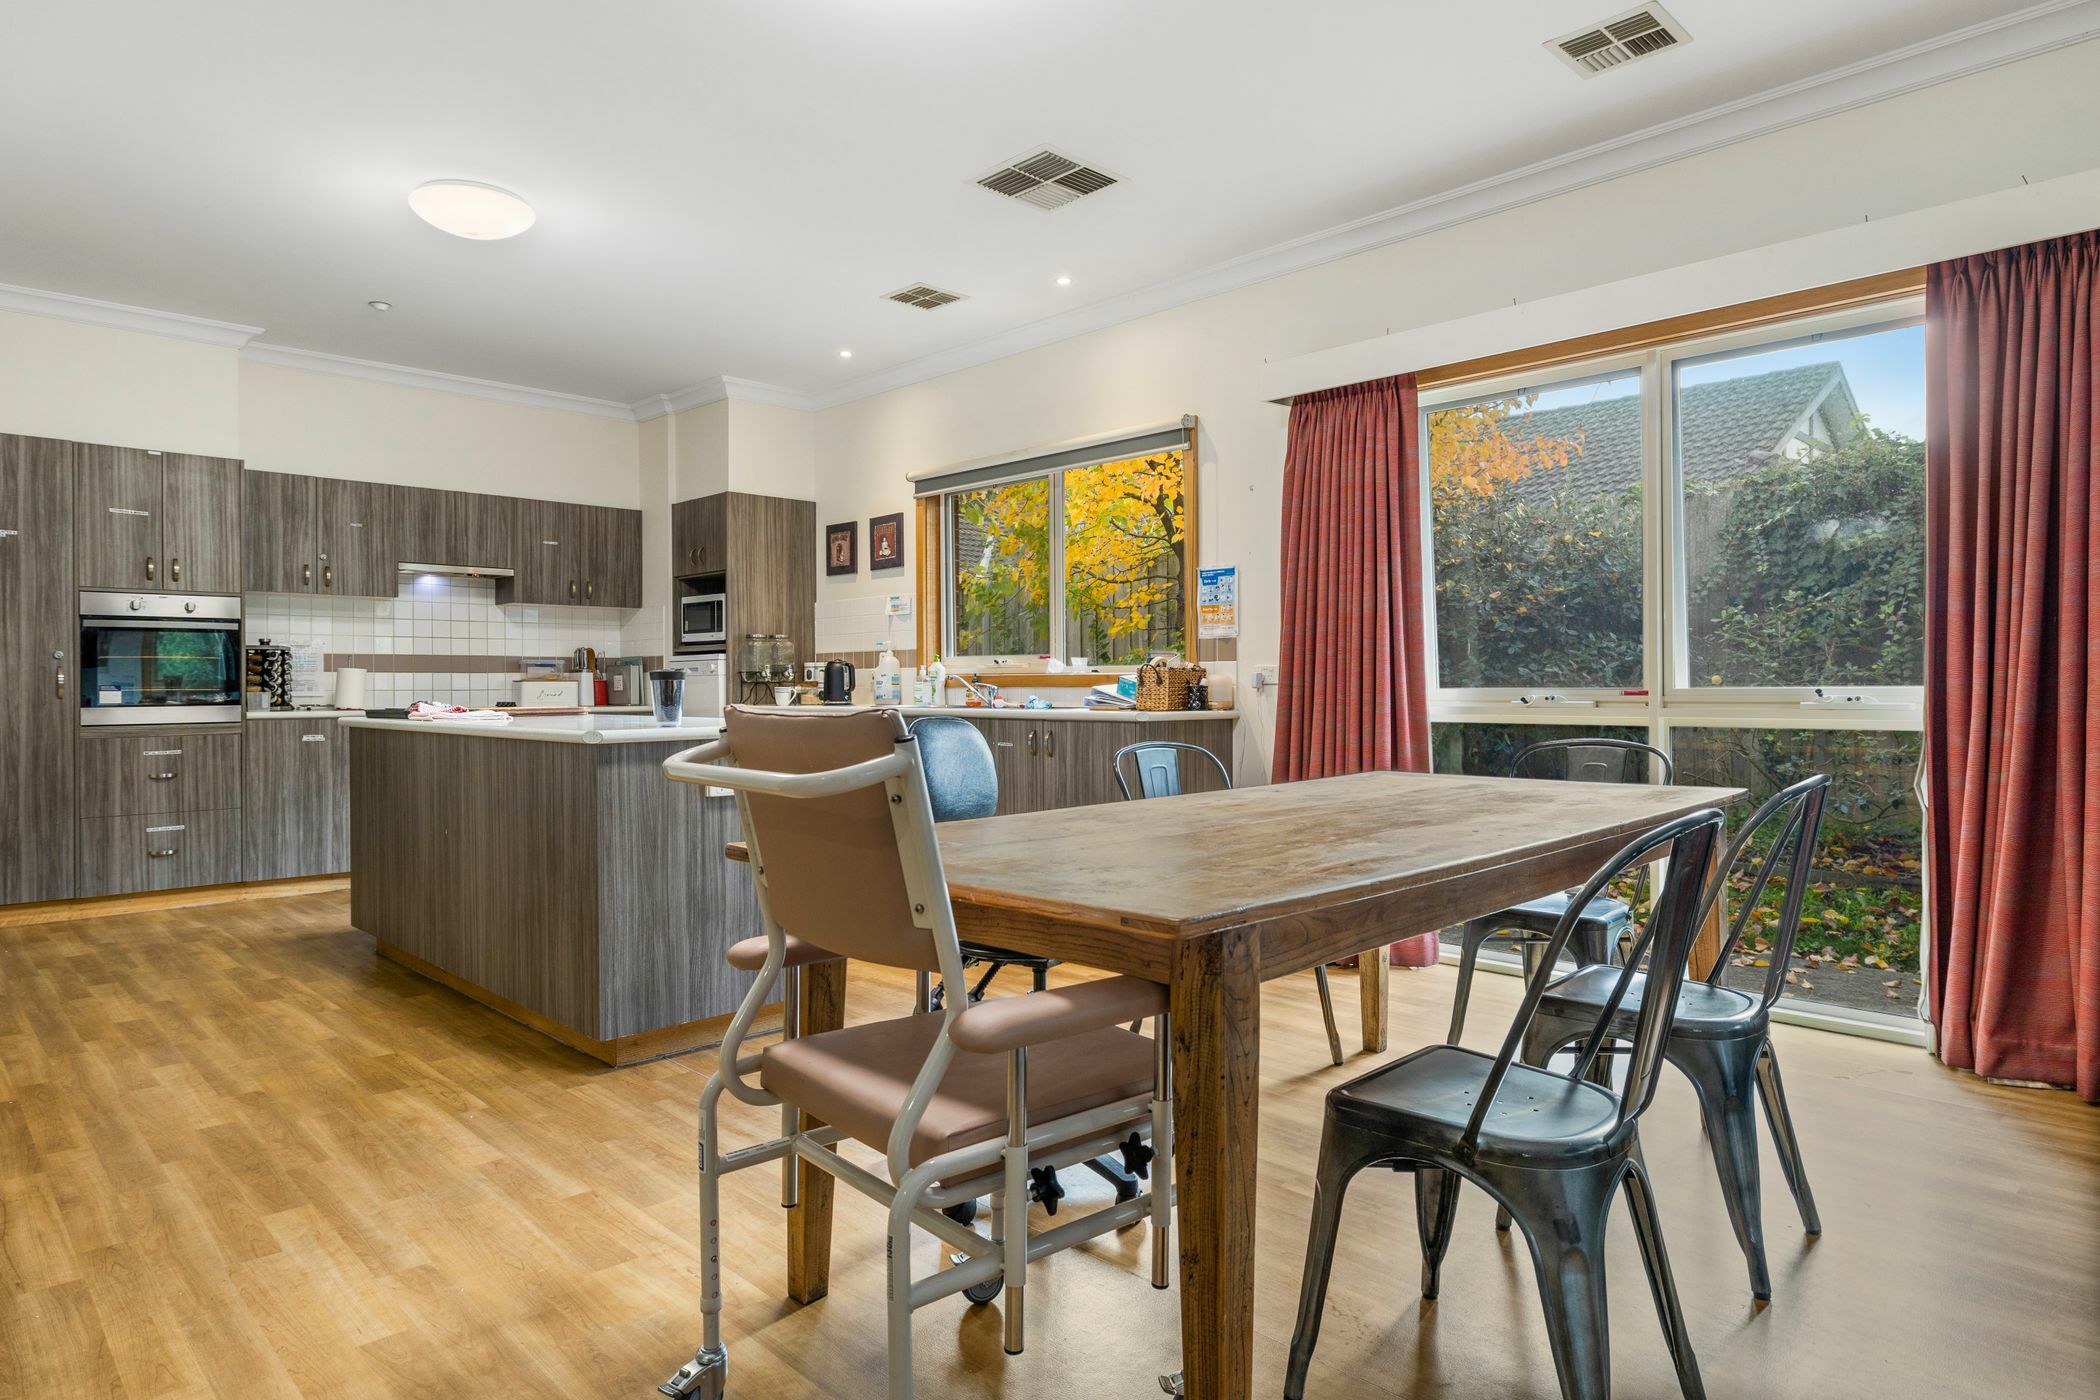 Dining area and kitchen area at SDA home in Ferntree Gully